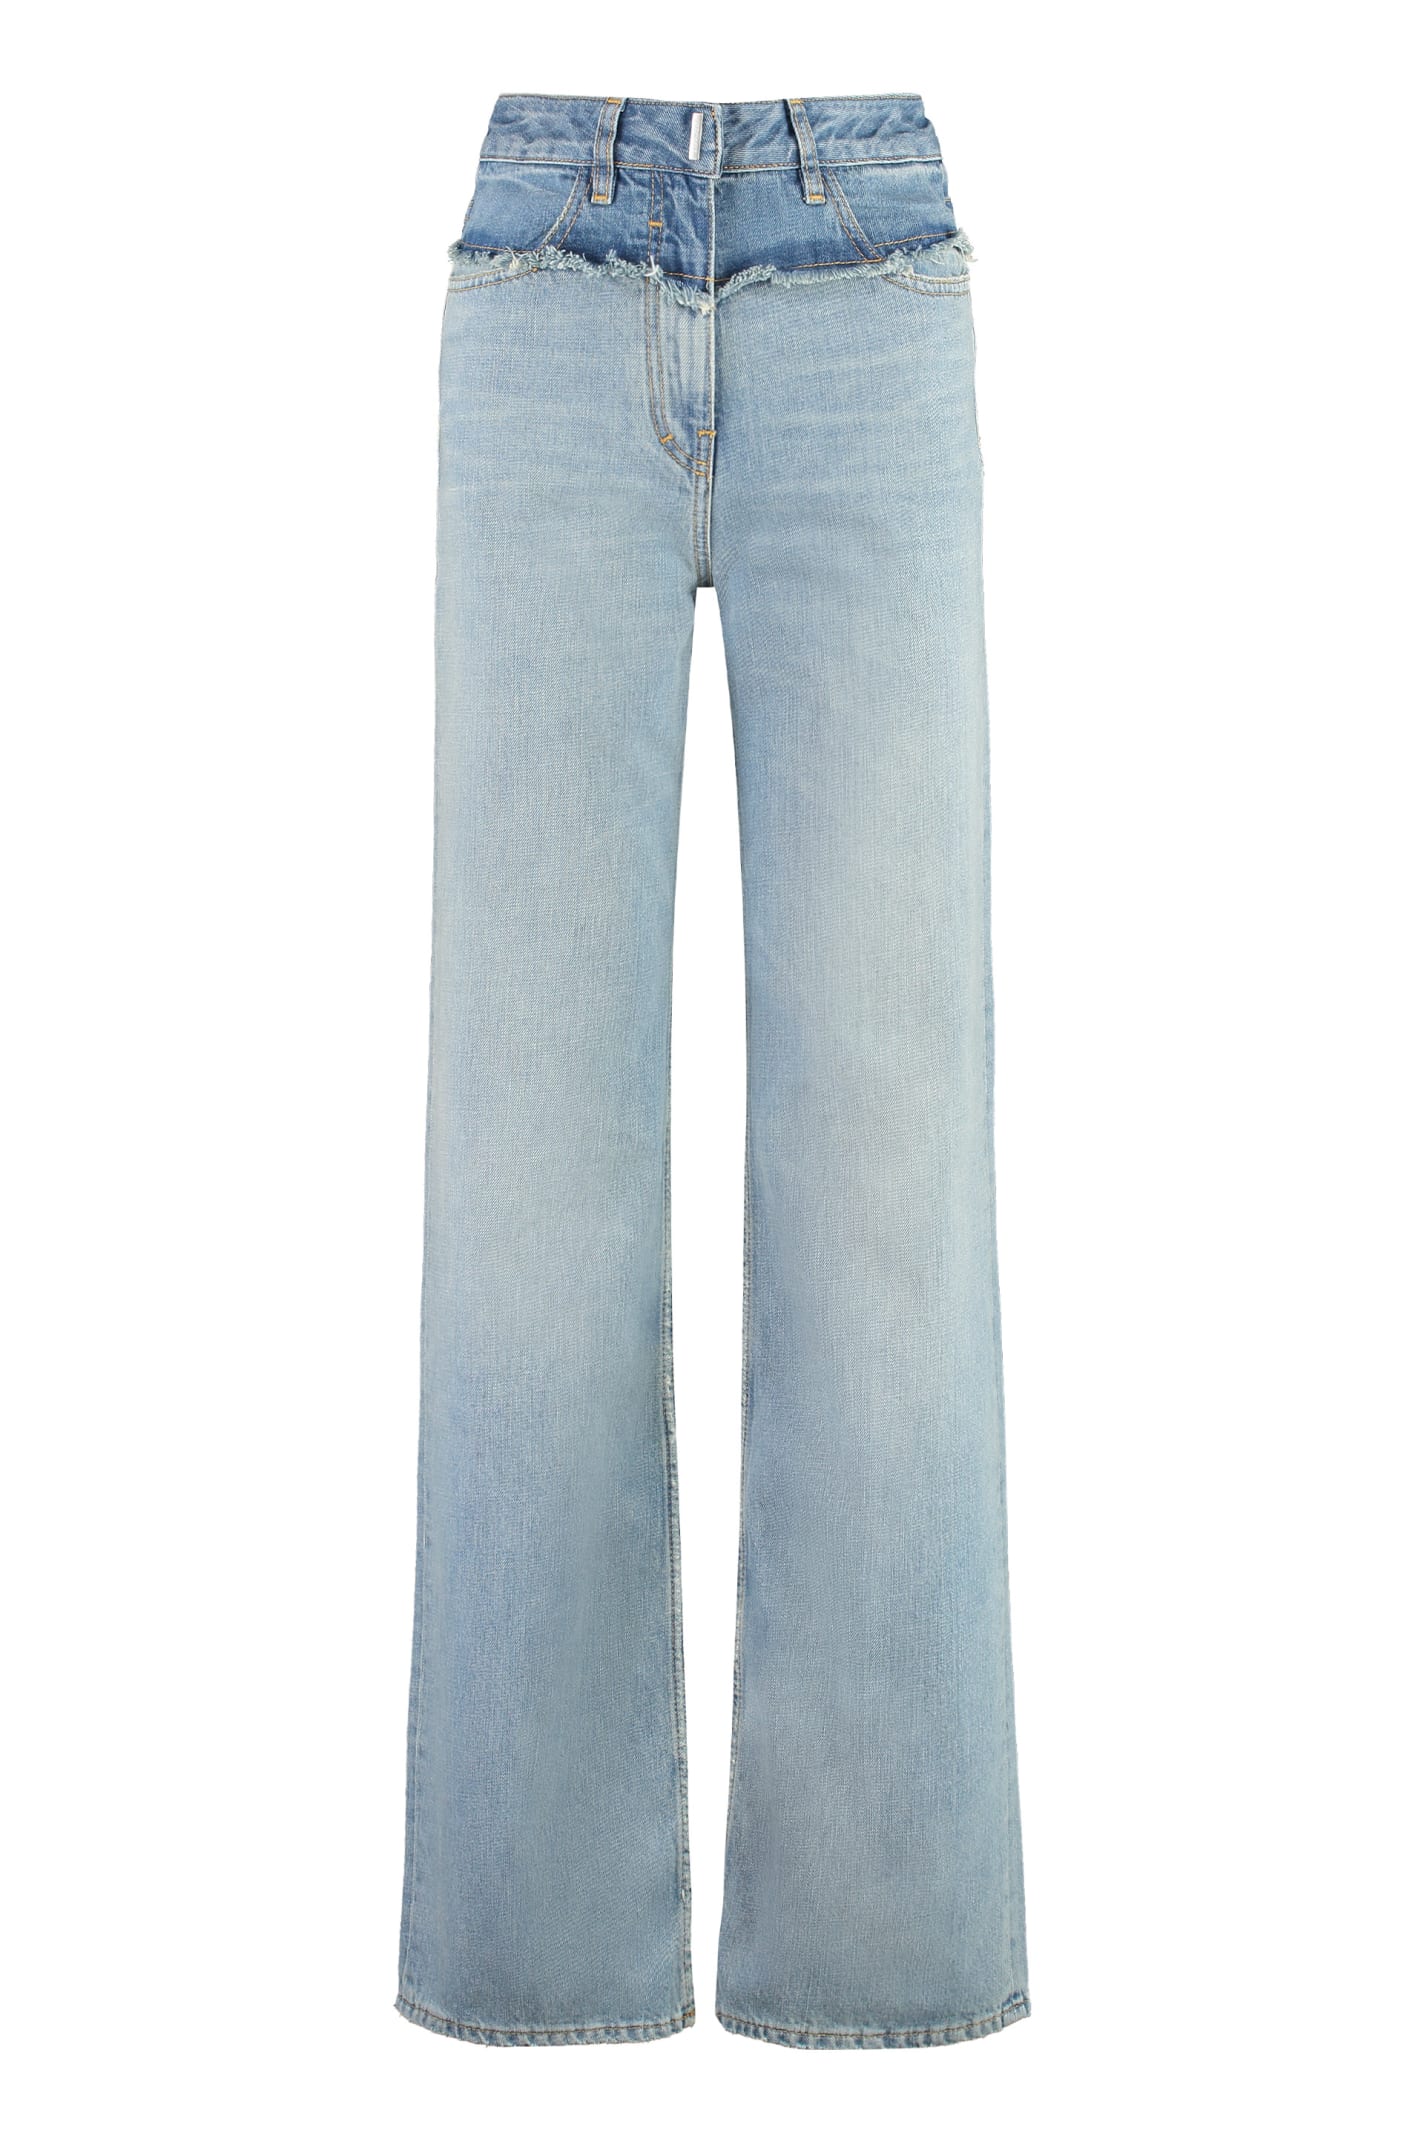 GIVENCHY WIDE-LEG JEANS